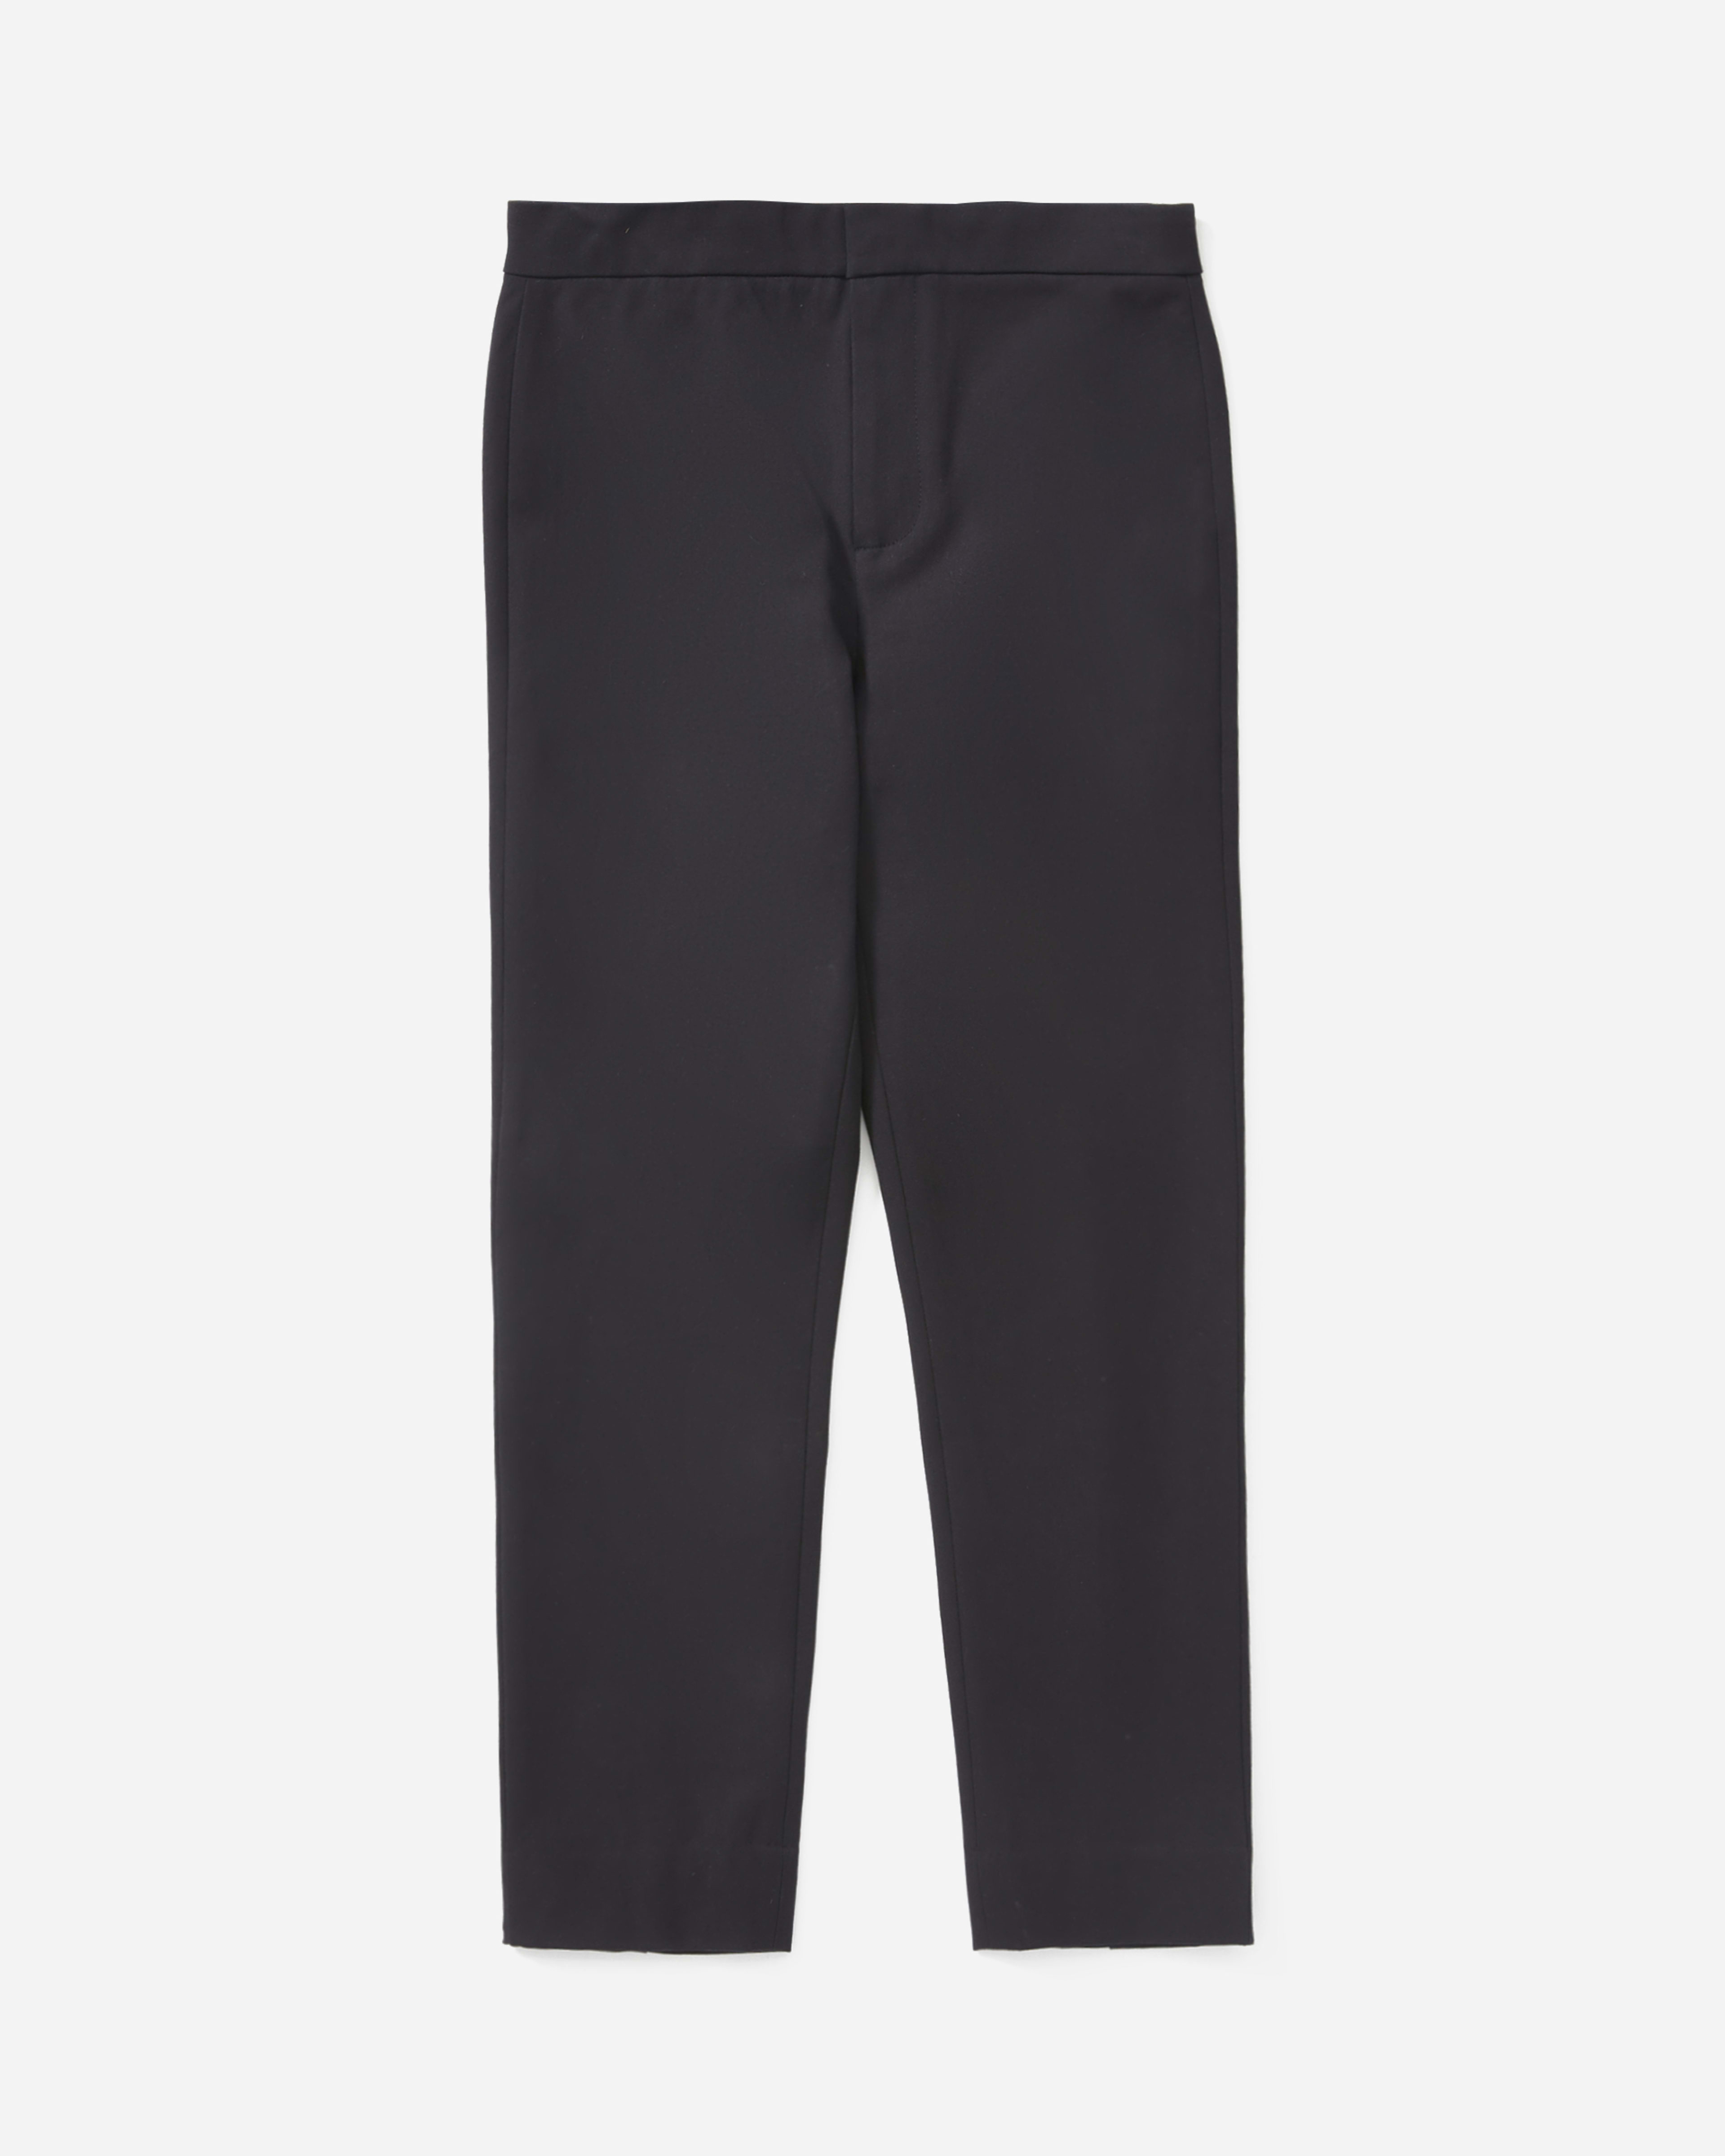 The Fixed-Waist Stretch Cotton Pant Black – Everlane